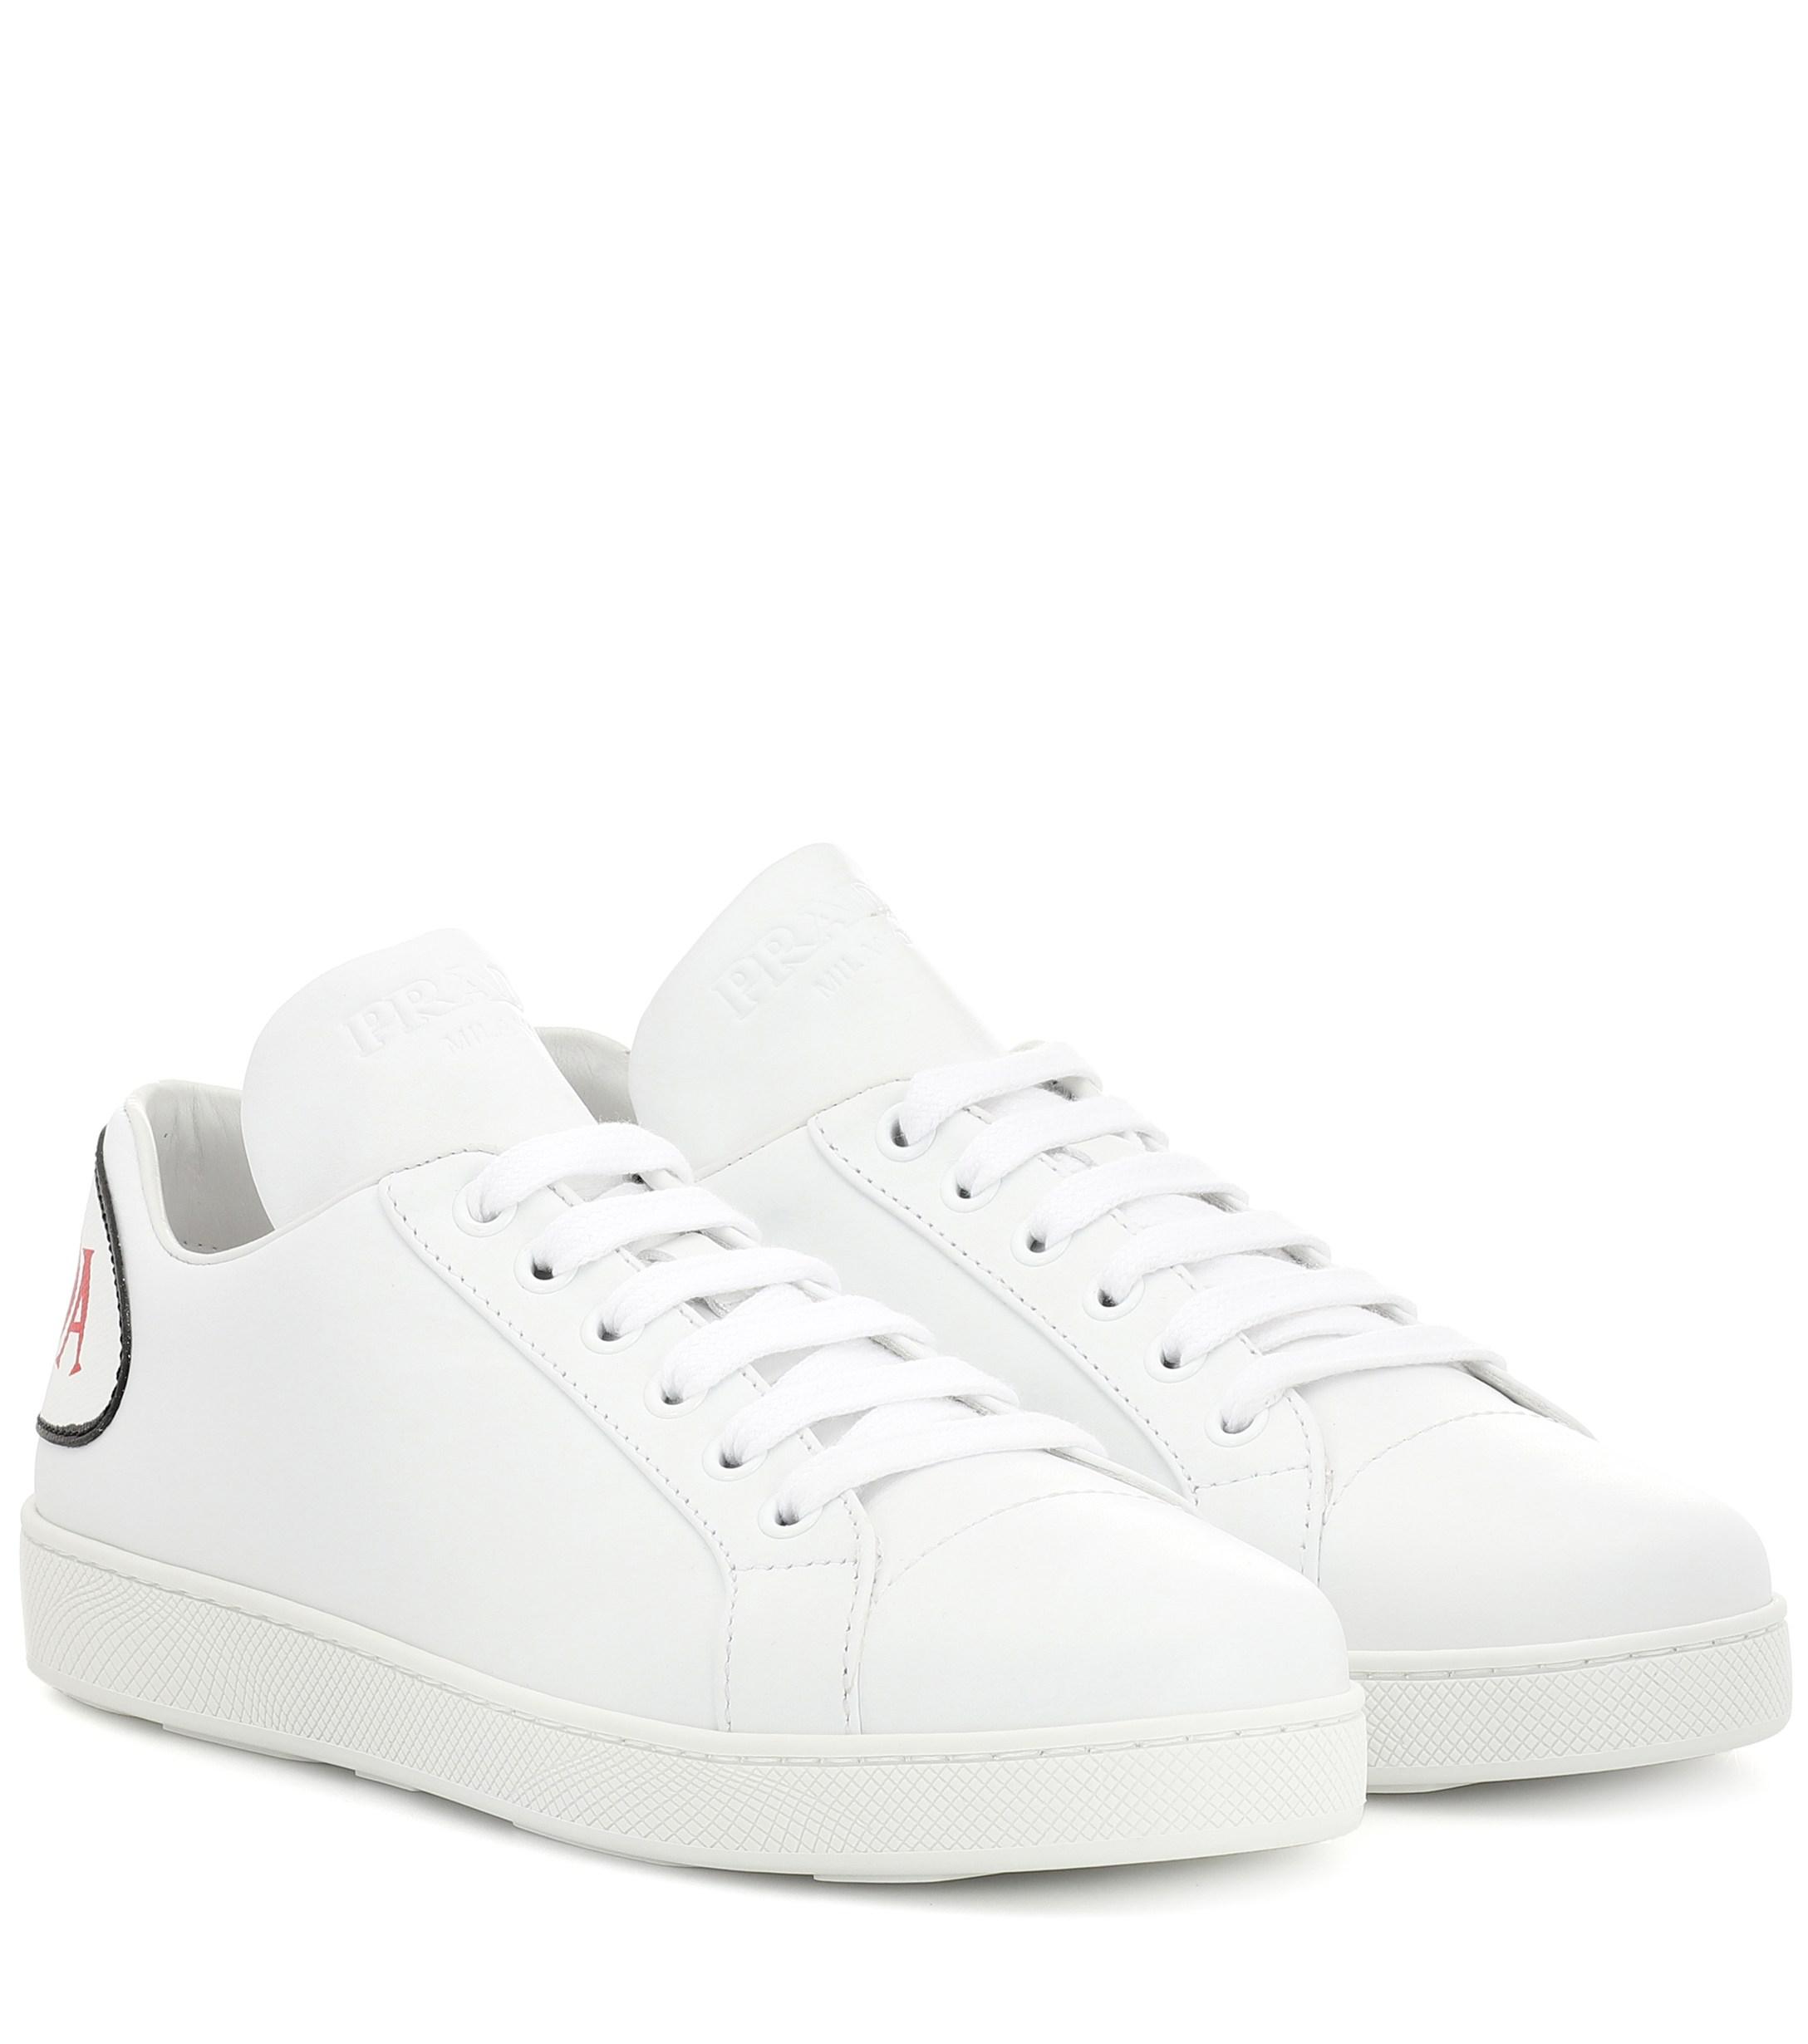 Prada Leather Sneakers in White - Lyst